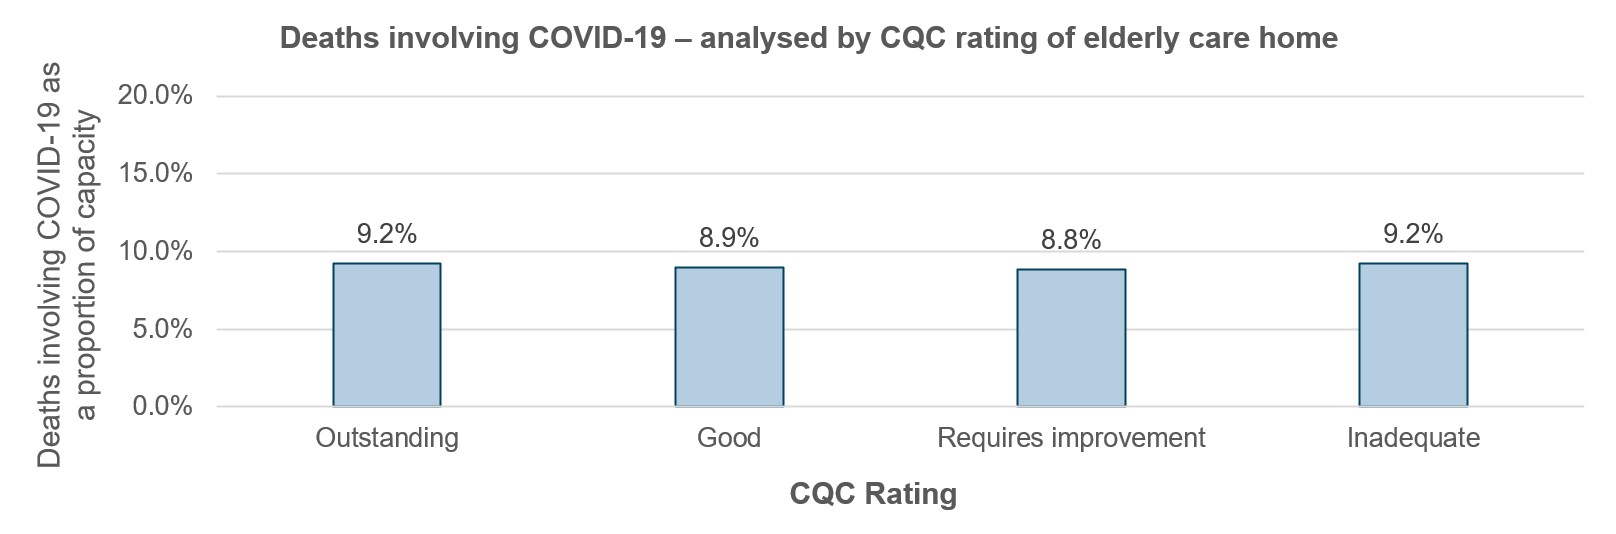 Deaths involving COVID-19 ¬¬¬¬¬¬¬¬– analysed by CQC rating of elderly care home